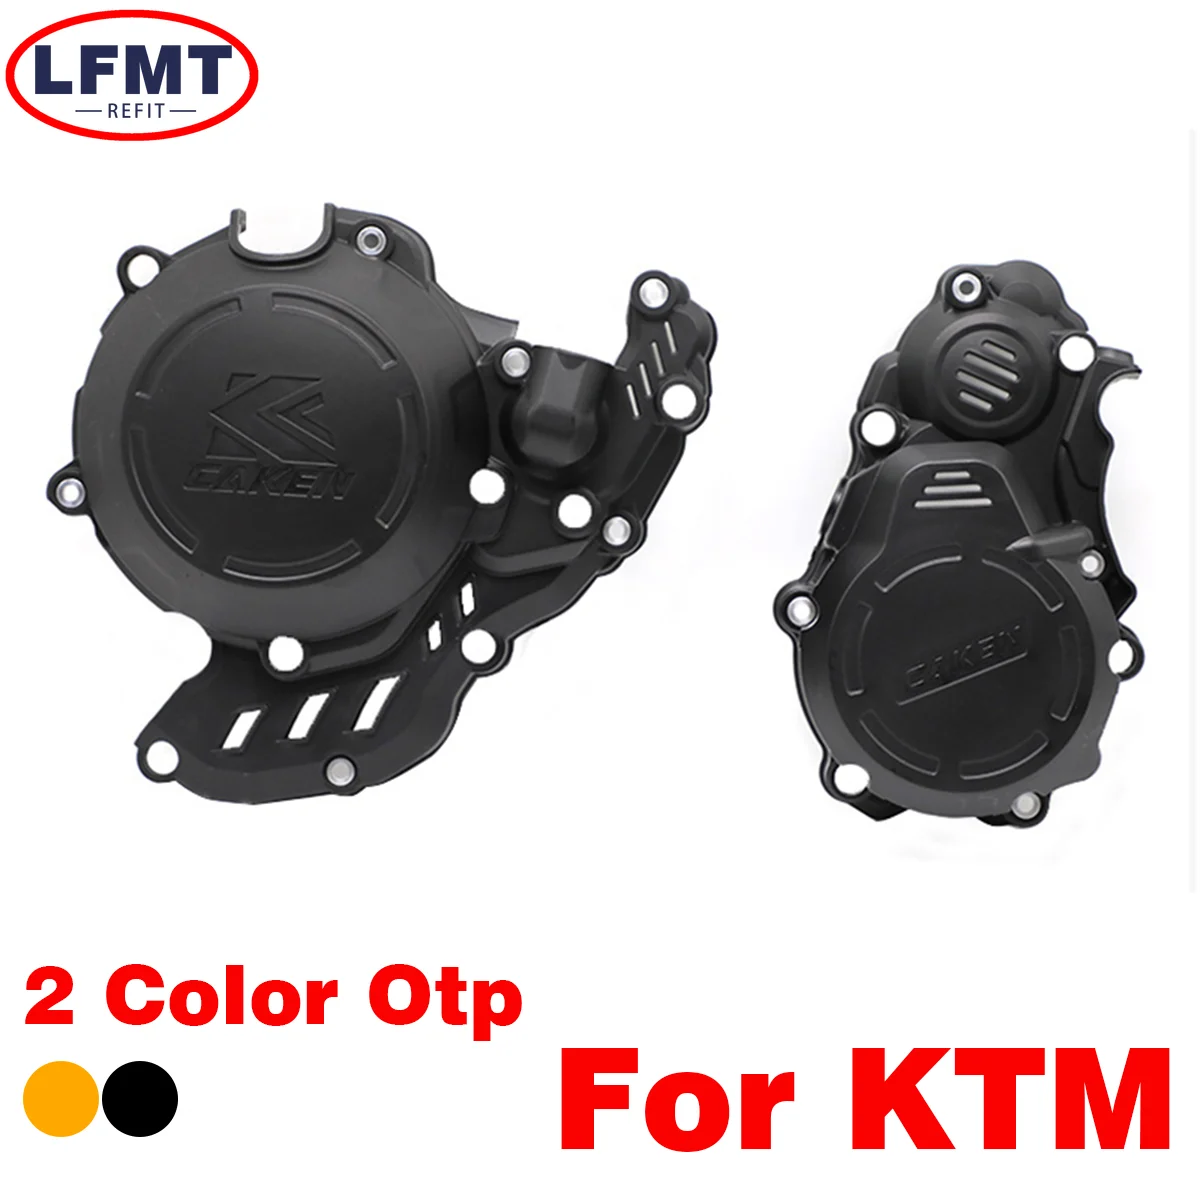 

For Husqvarna FC FE FX GAS GAS EC 250 350 2023 For KTM EXC-F SX-F XC-F XCF-W FREERIDE 4T Clutch Cover Guard Ignition Protector